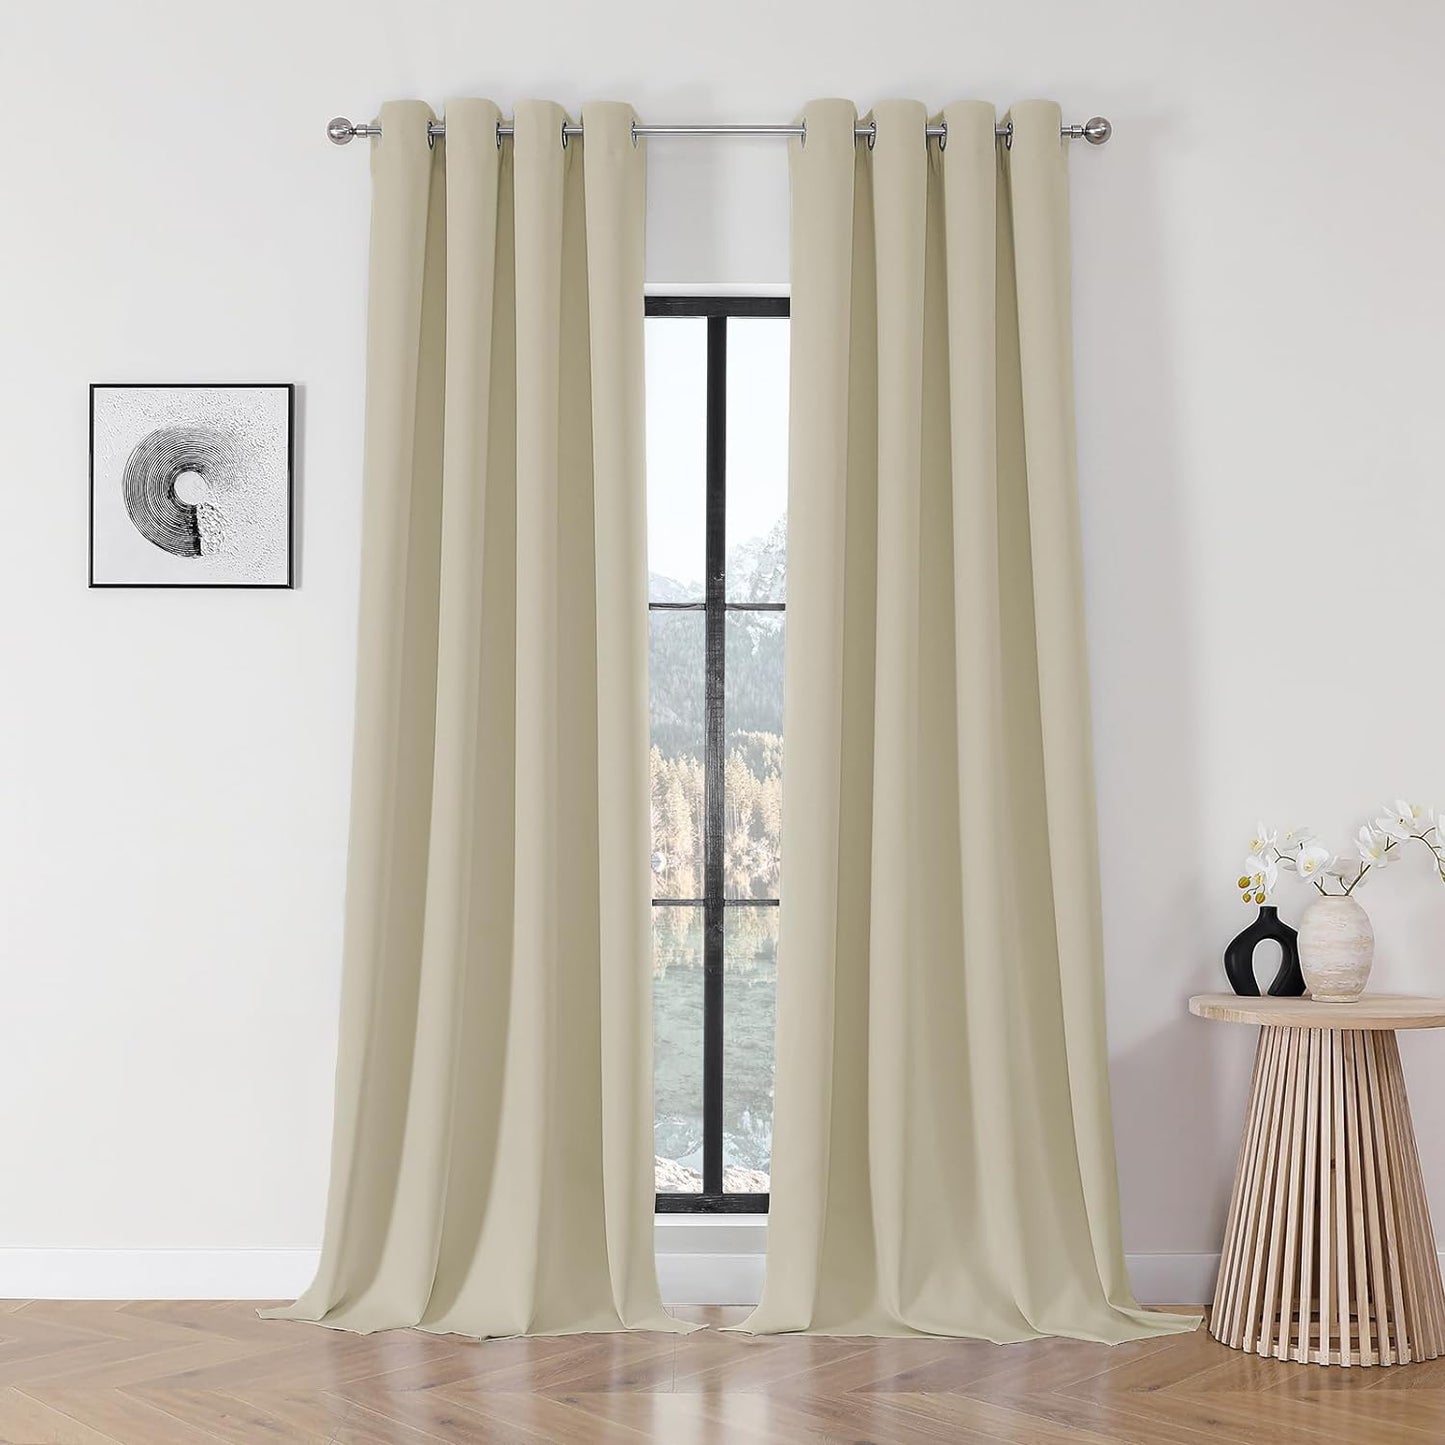 Joydeco Blackout Curtains 84 Inch Length 2 Panels Set, Thermal Insulated Long Curtains& Drapes 2 Burg, Room Darkening Grommet Curtains for Bedroom Living Room Window (Black, W52 X L84 Inch)  Joydeco Light Beige 52W X 108L Inch X 2 Panels 